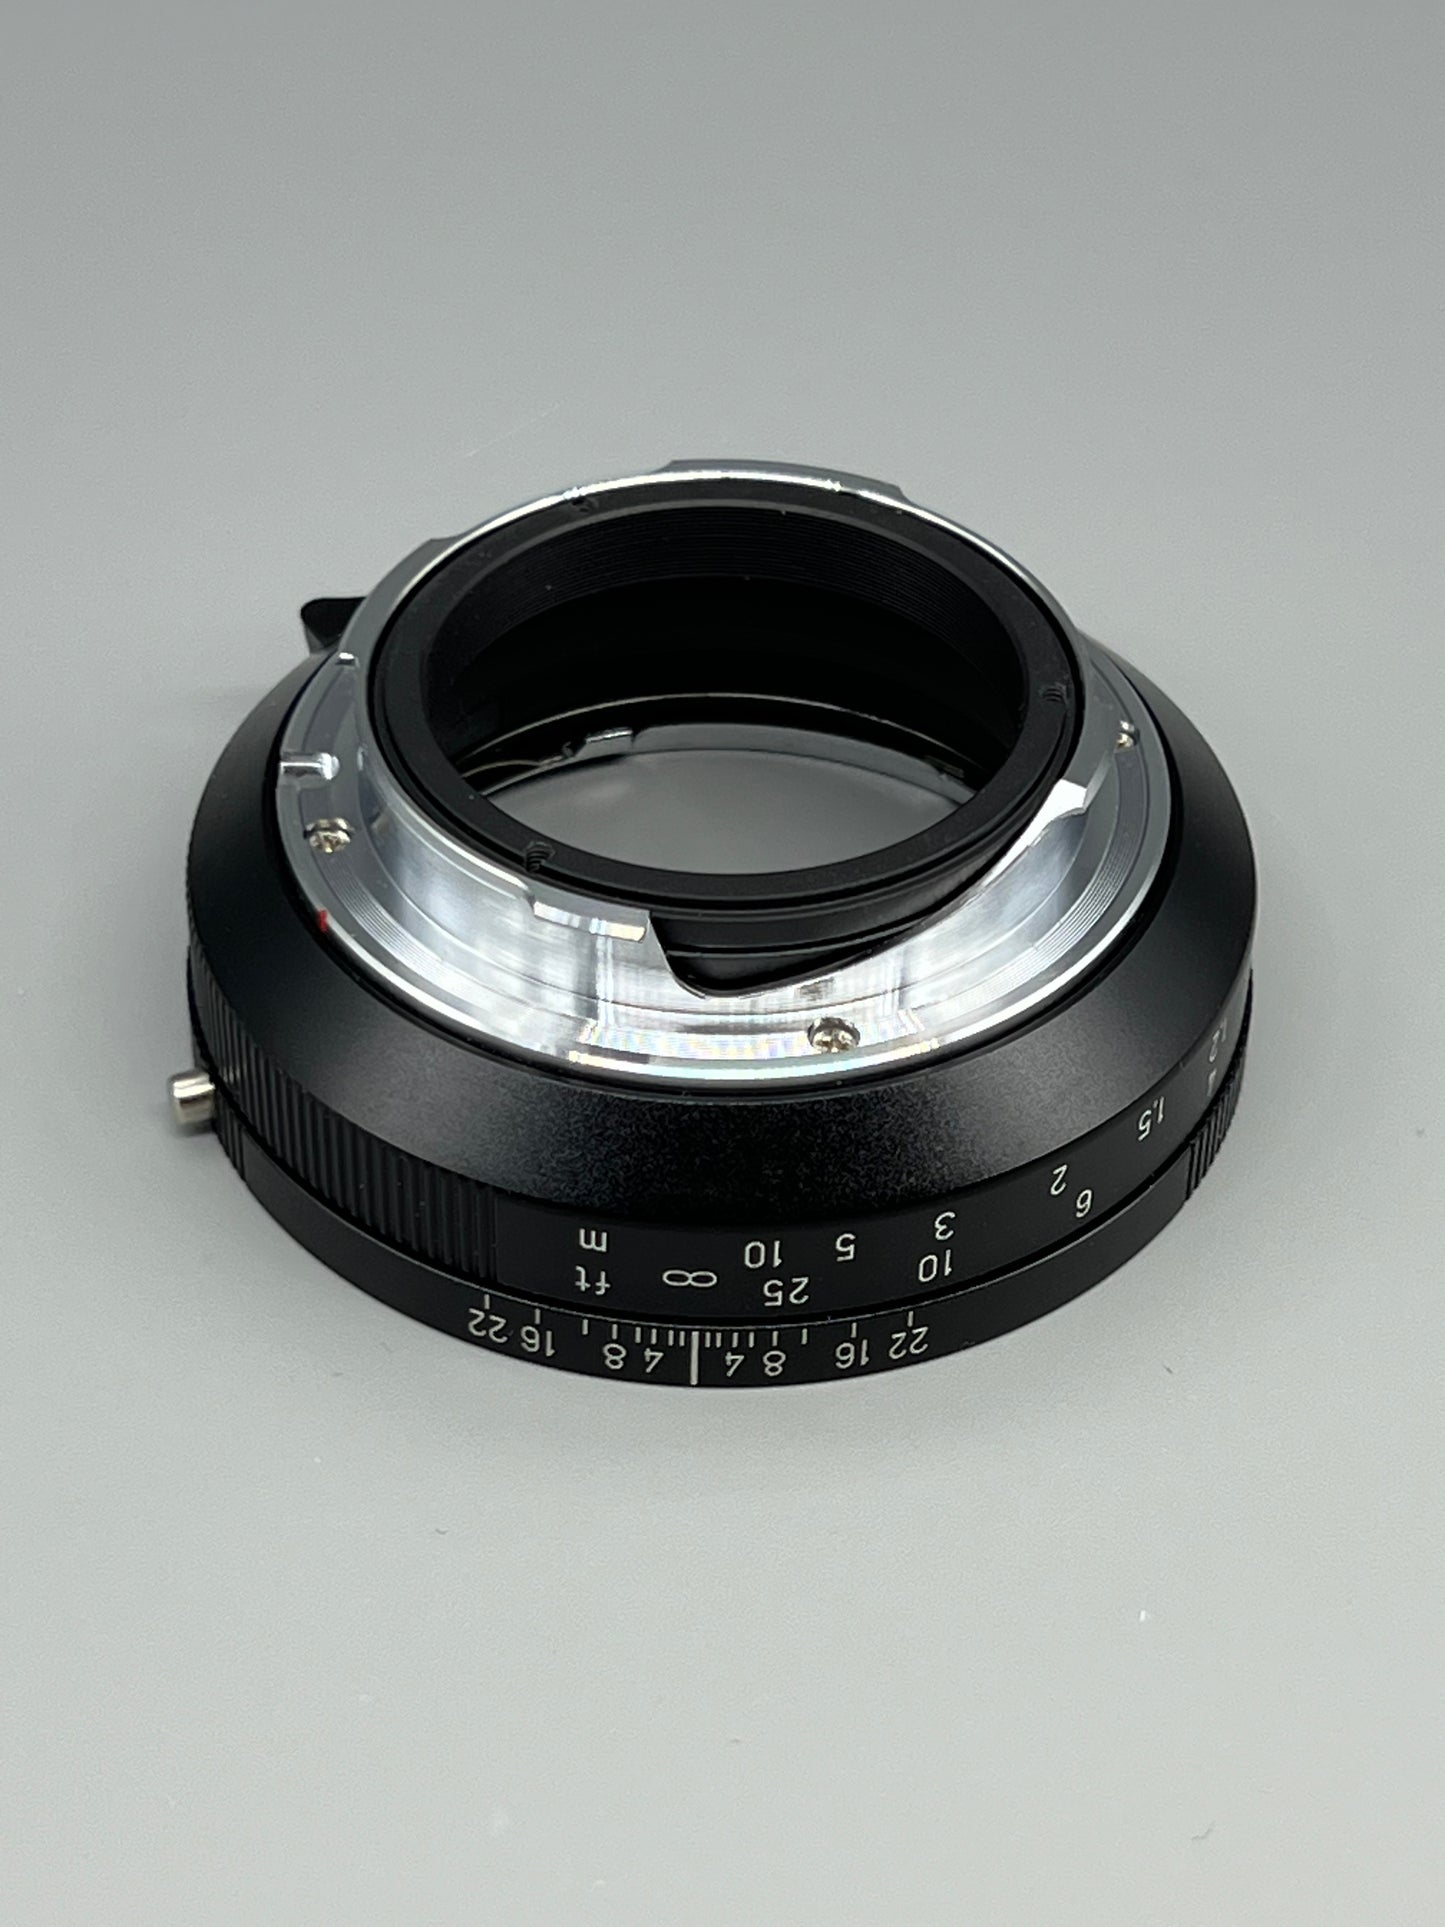 CY-LM R50 rangefinder-link adapter - Contax/Yashica mount lens to Leica M